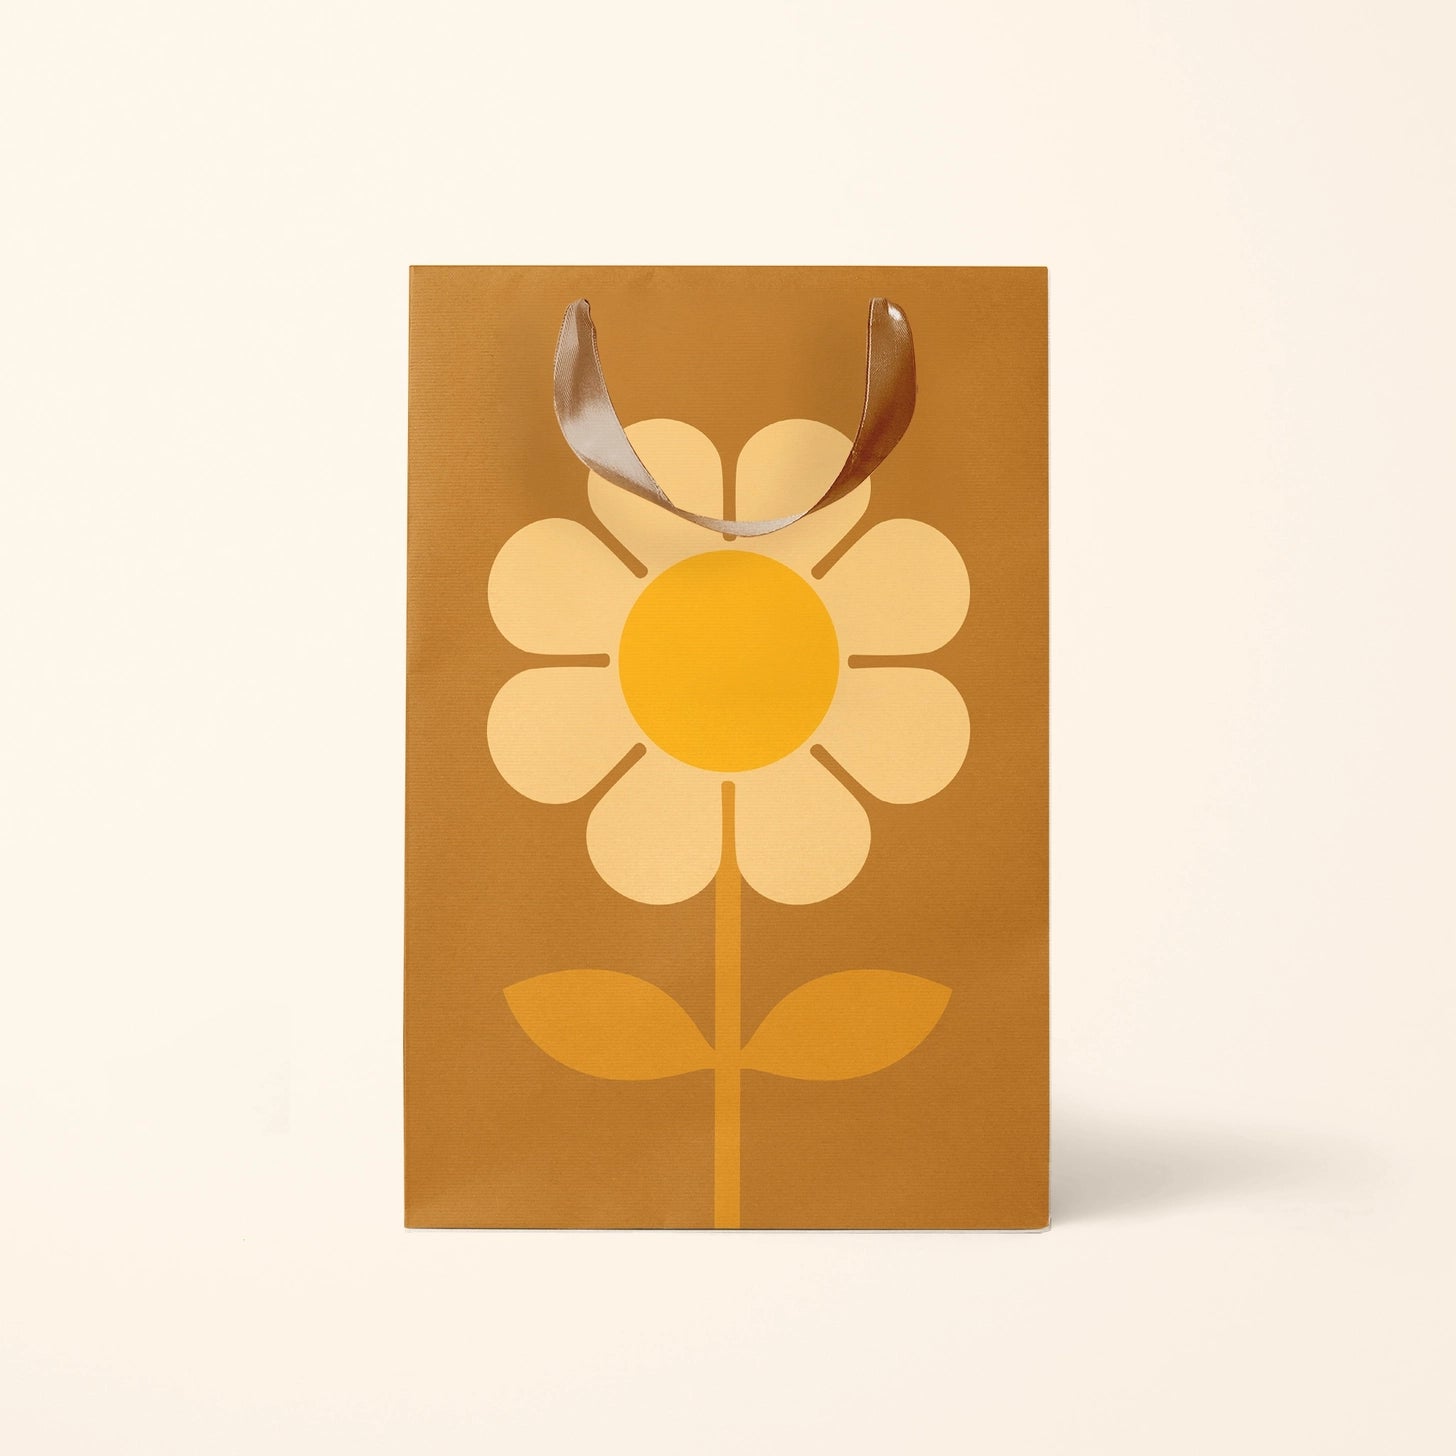 On a white background is a brown gift bag with a large yellow daisy in the center.